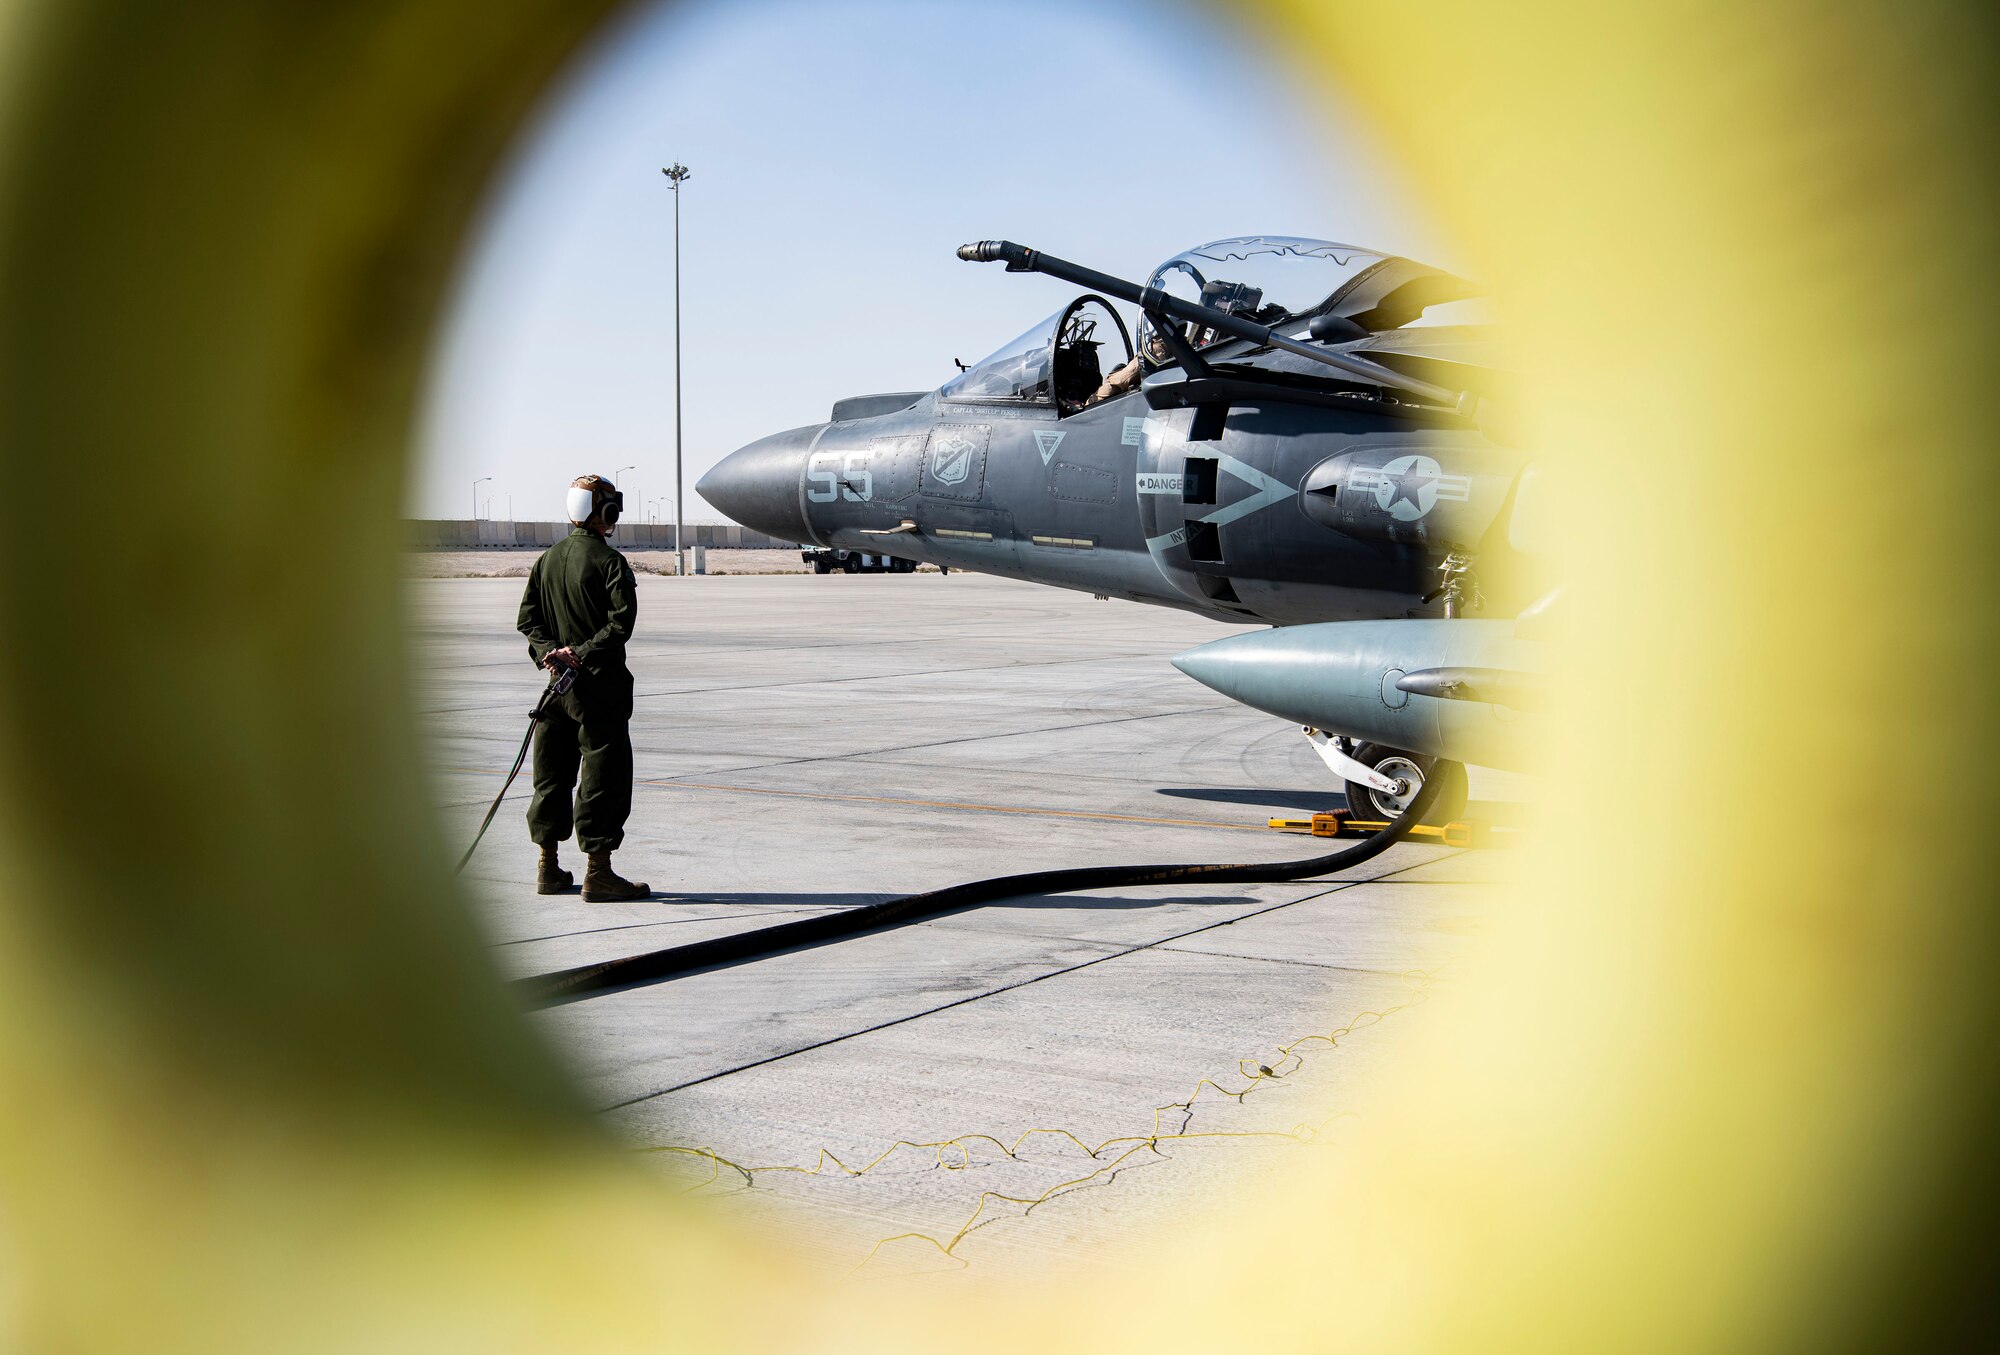 Marine watches as a fighter jet is refueled.